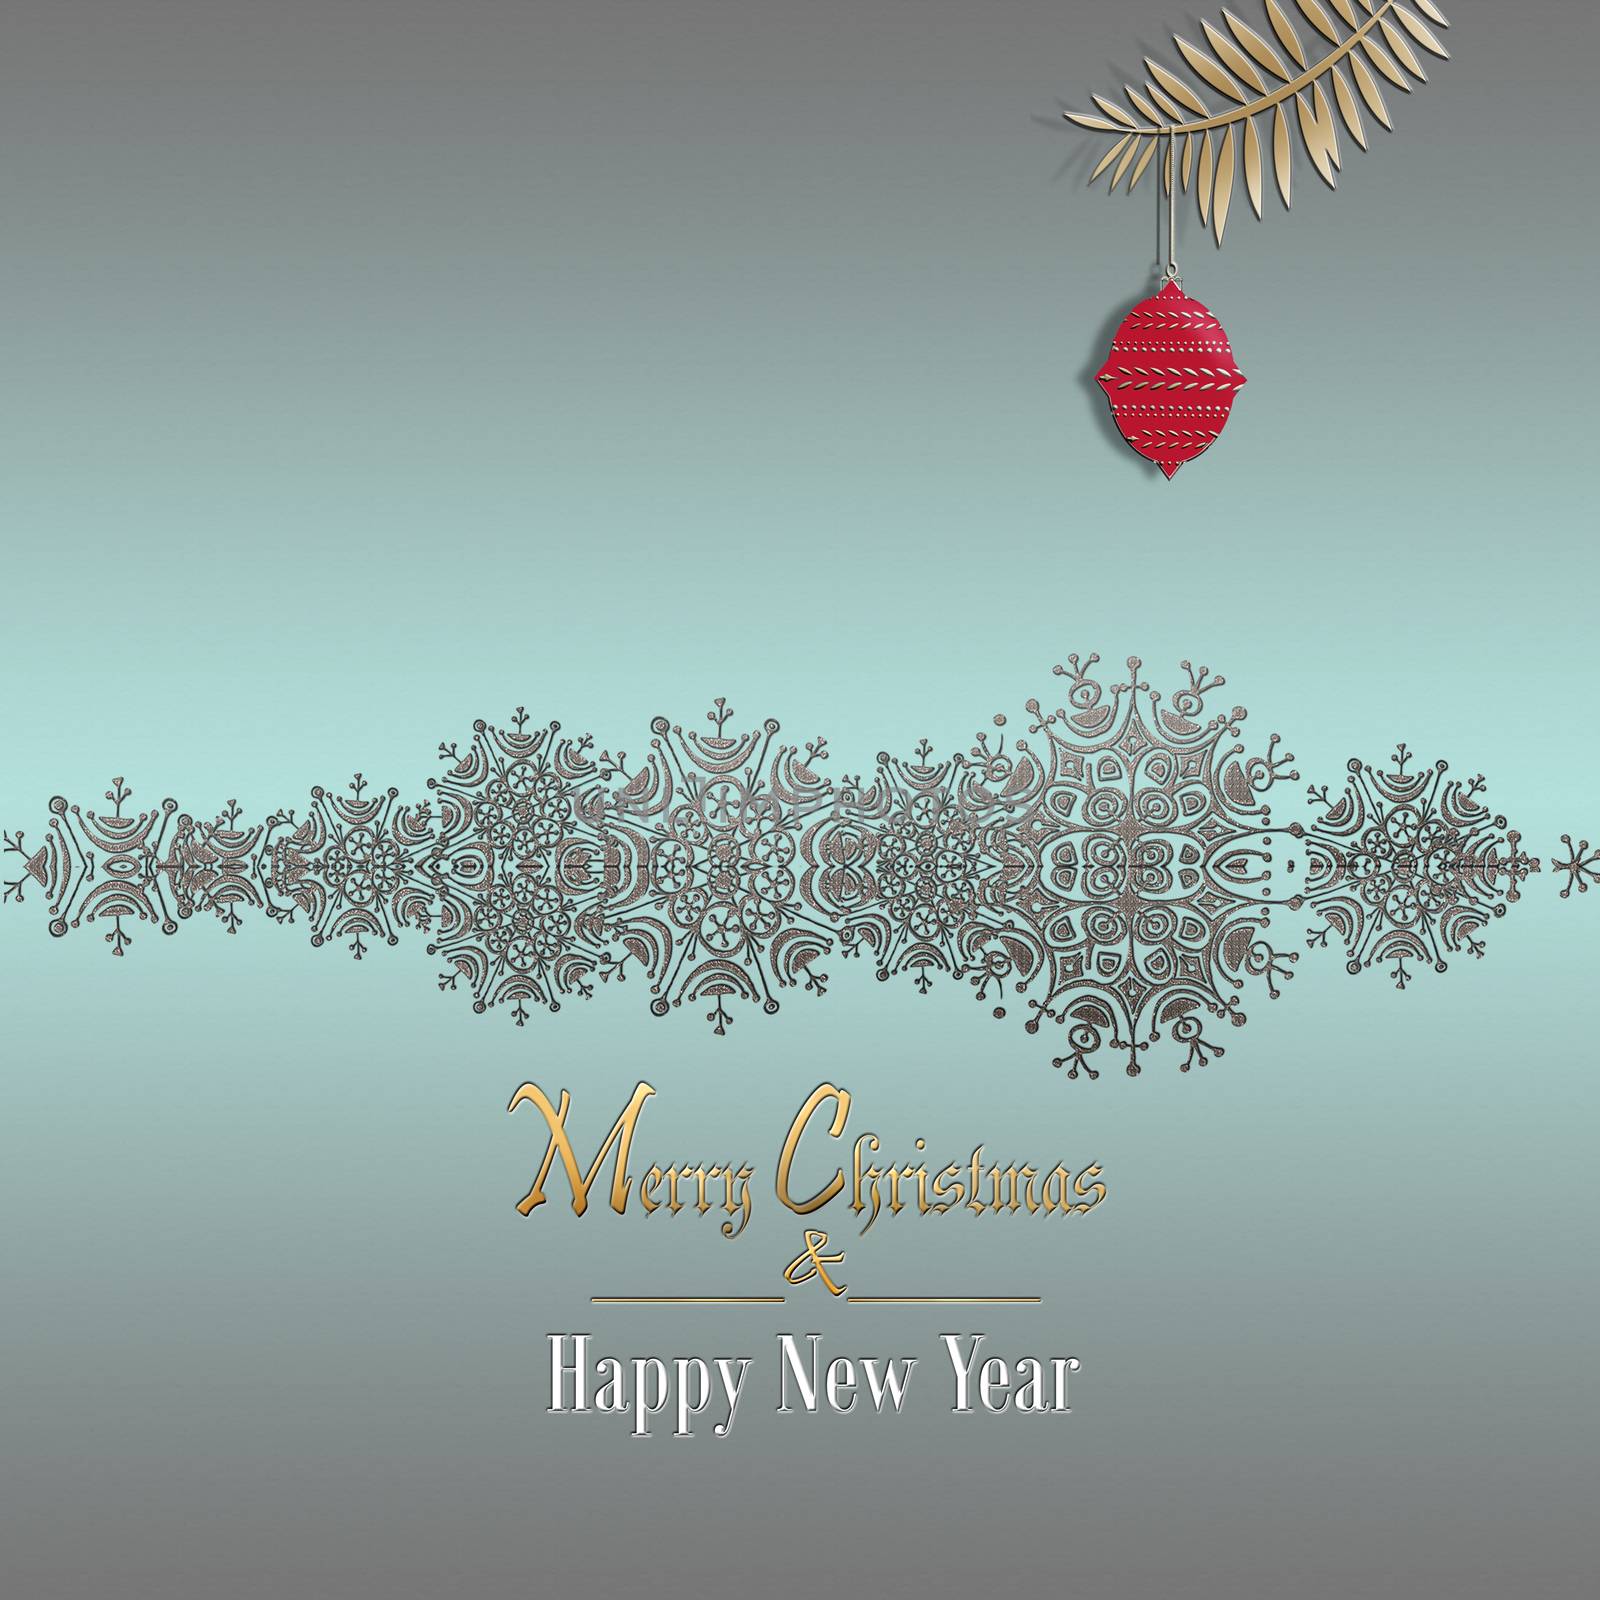 Christmas and Happy New Year Background with silver border of snowflakes, red ball on pastel green metallic background. 3D illustration